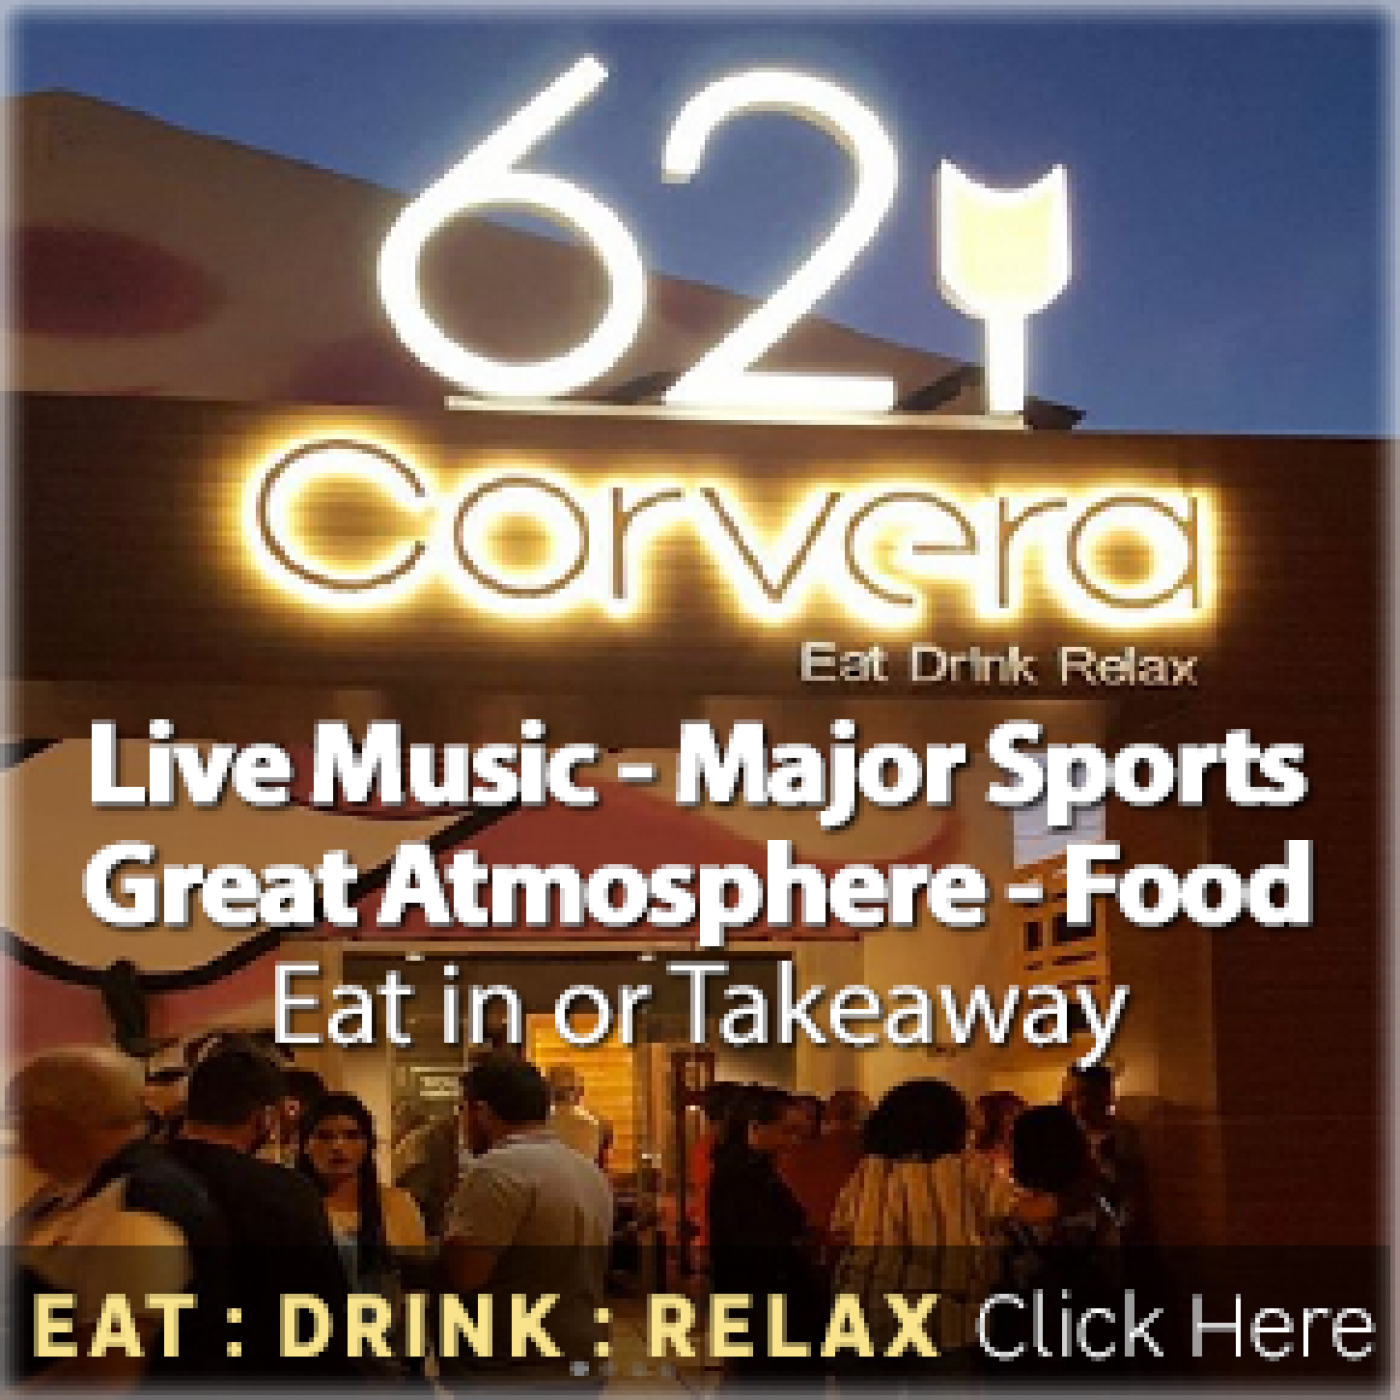 Bar 62 Corvera: eat, drink and relax with live entertainment and sports coverage at this family bar in Corvera